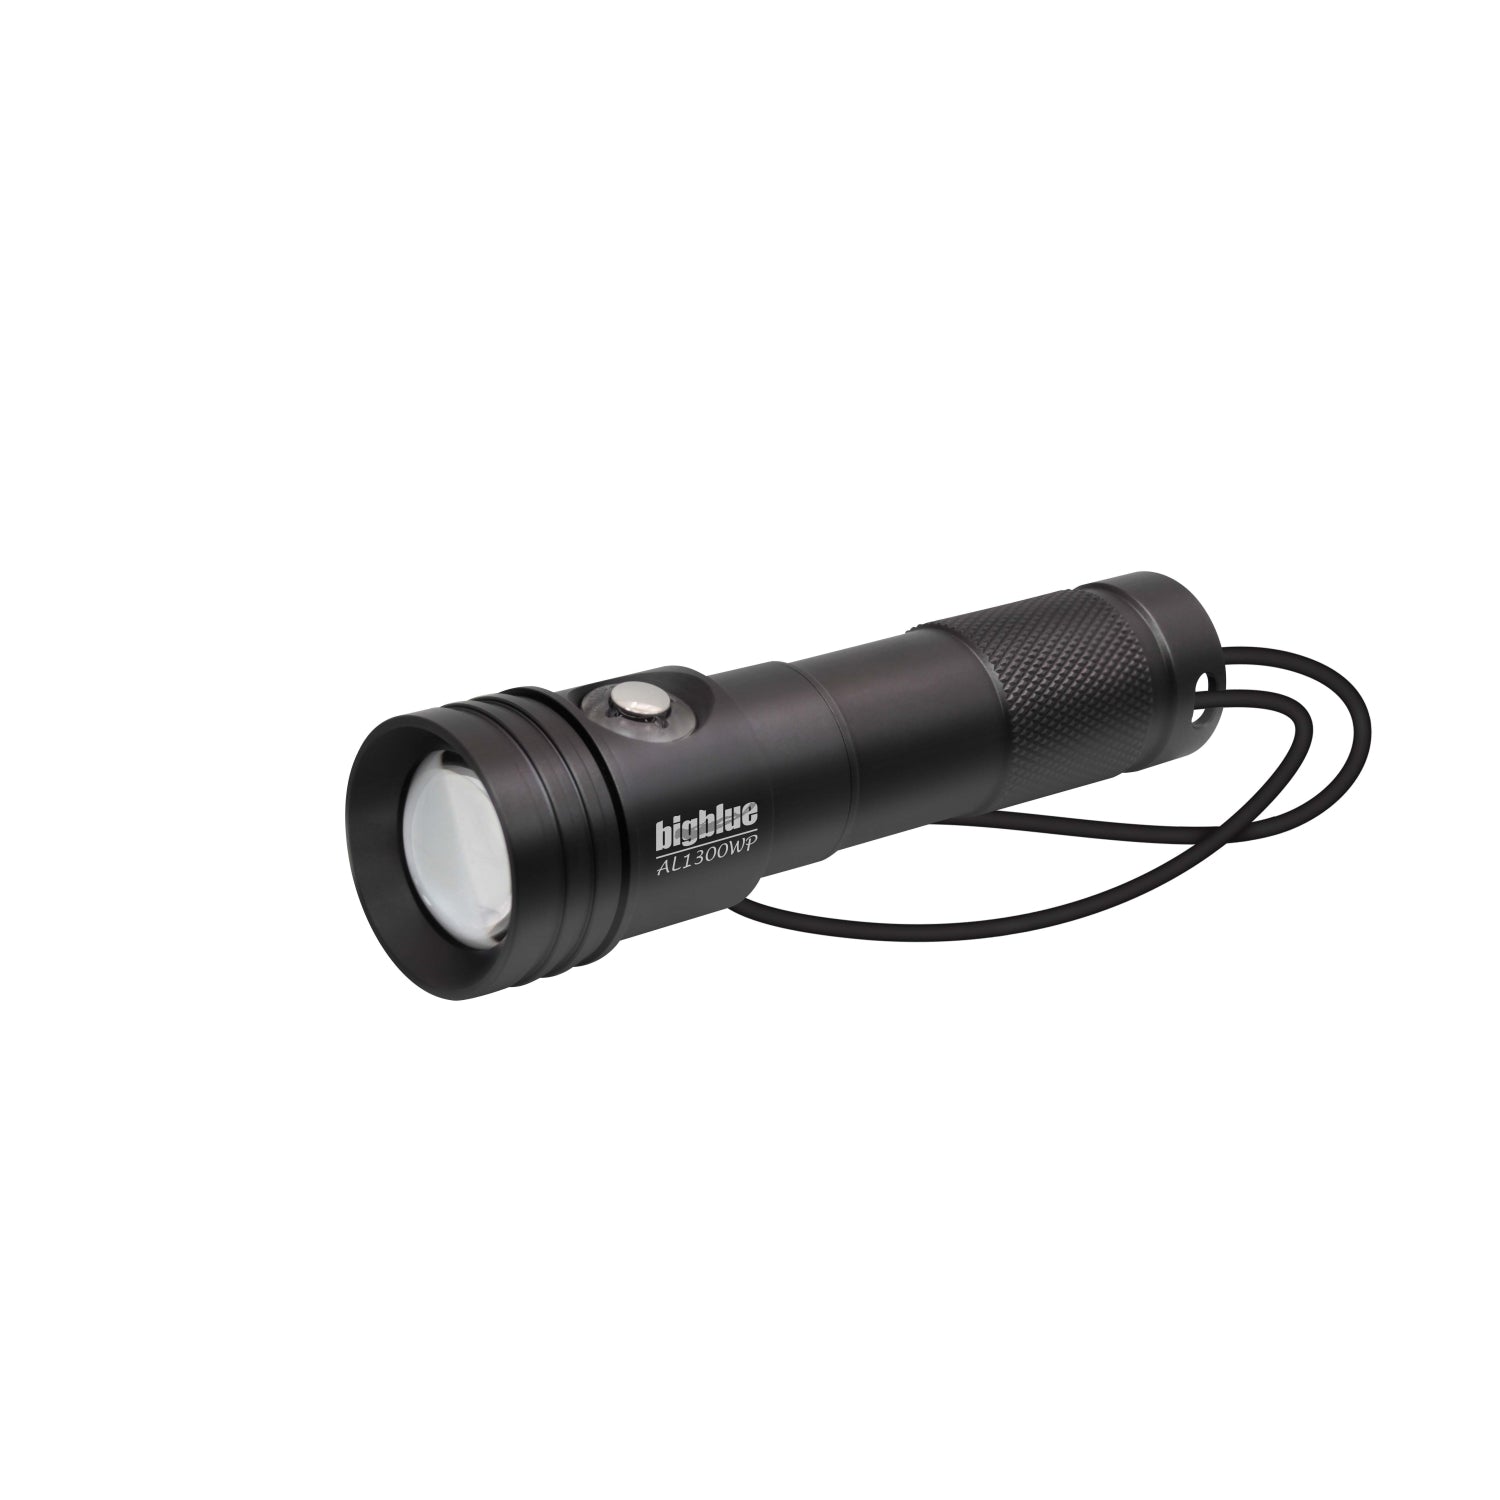 BigBlue 1300 Lumen Wide Beam Dive Light-Without Tail